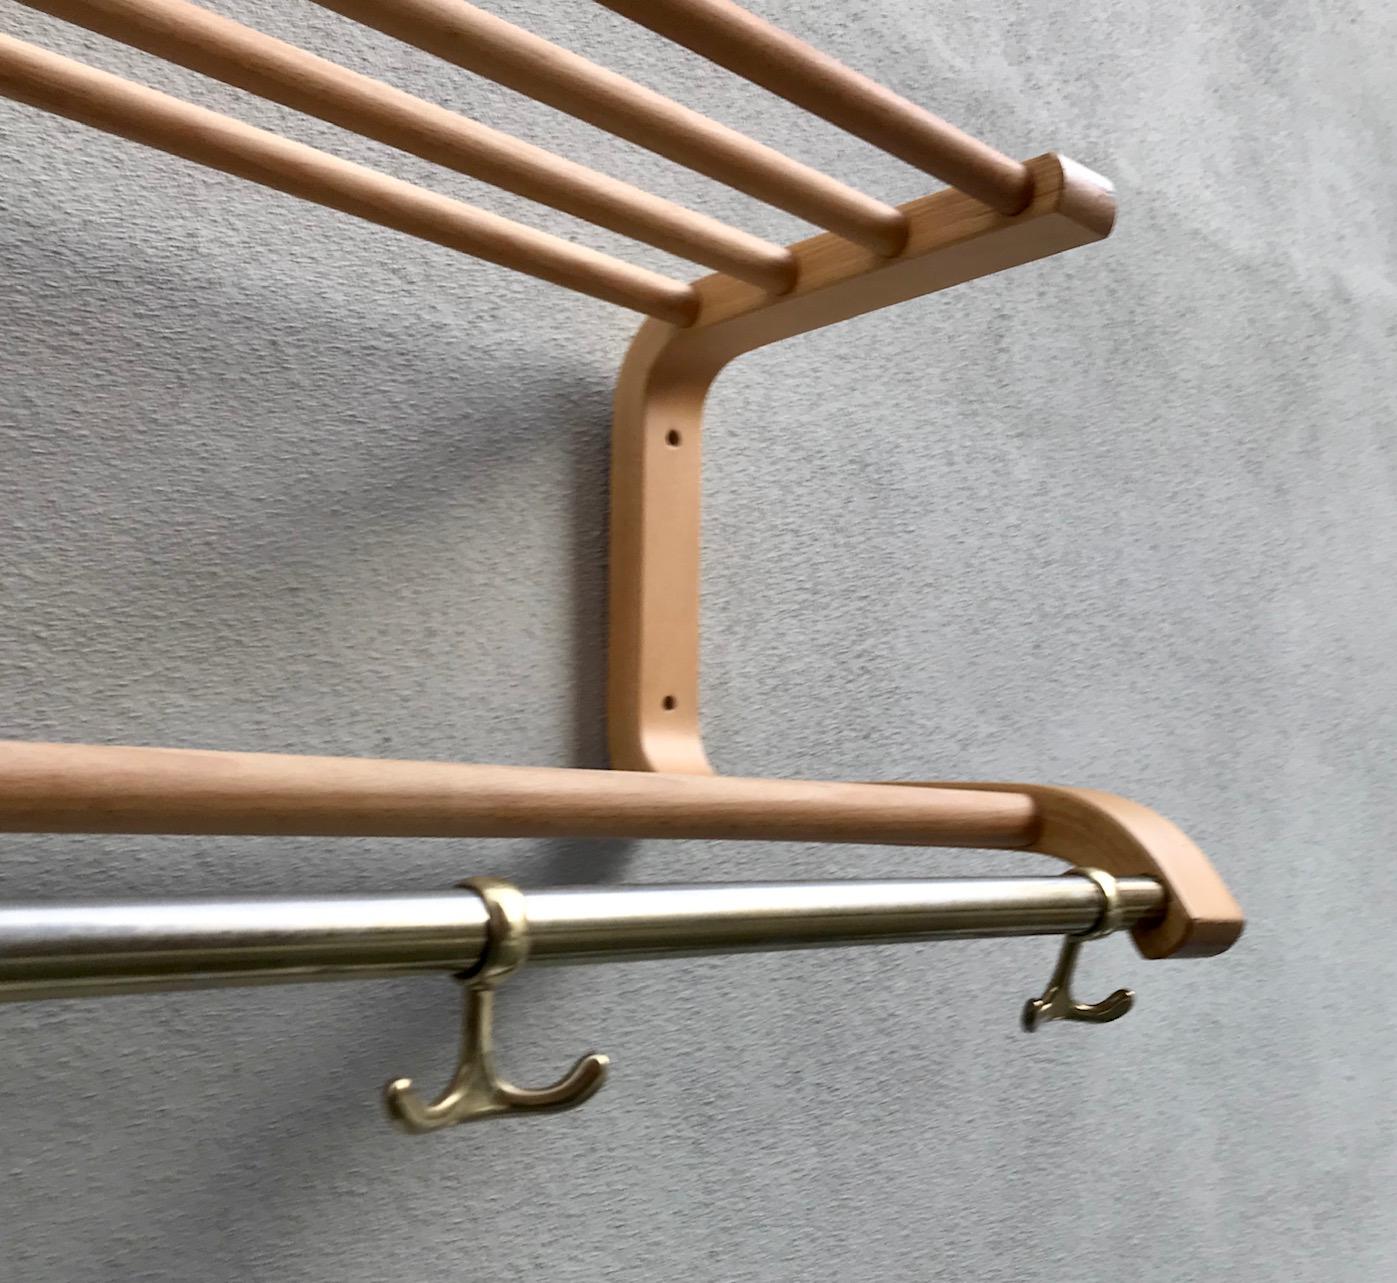 This coat and hat rack was probably manufactured by Artek in Finland during the 1970s. It is in the style of Alvar Aalto design for his own villa in 1936. The mounts/sides are made from hand-bent lacquered birch, the sticks from solid birch and the